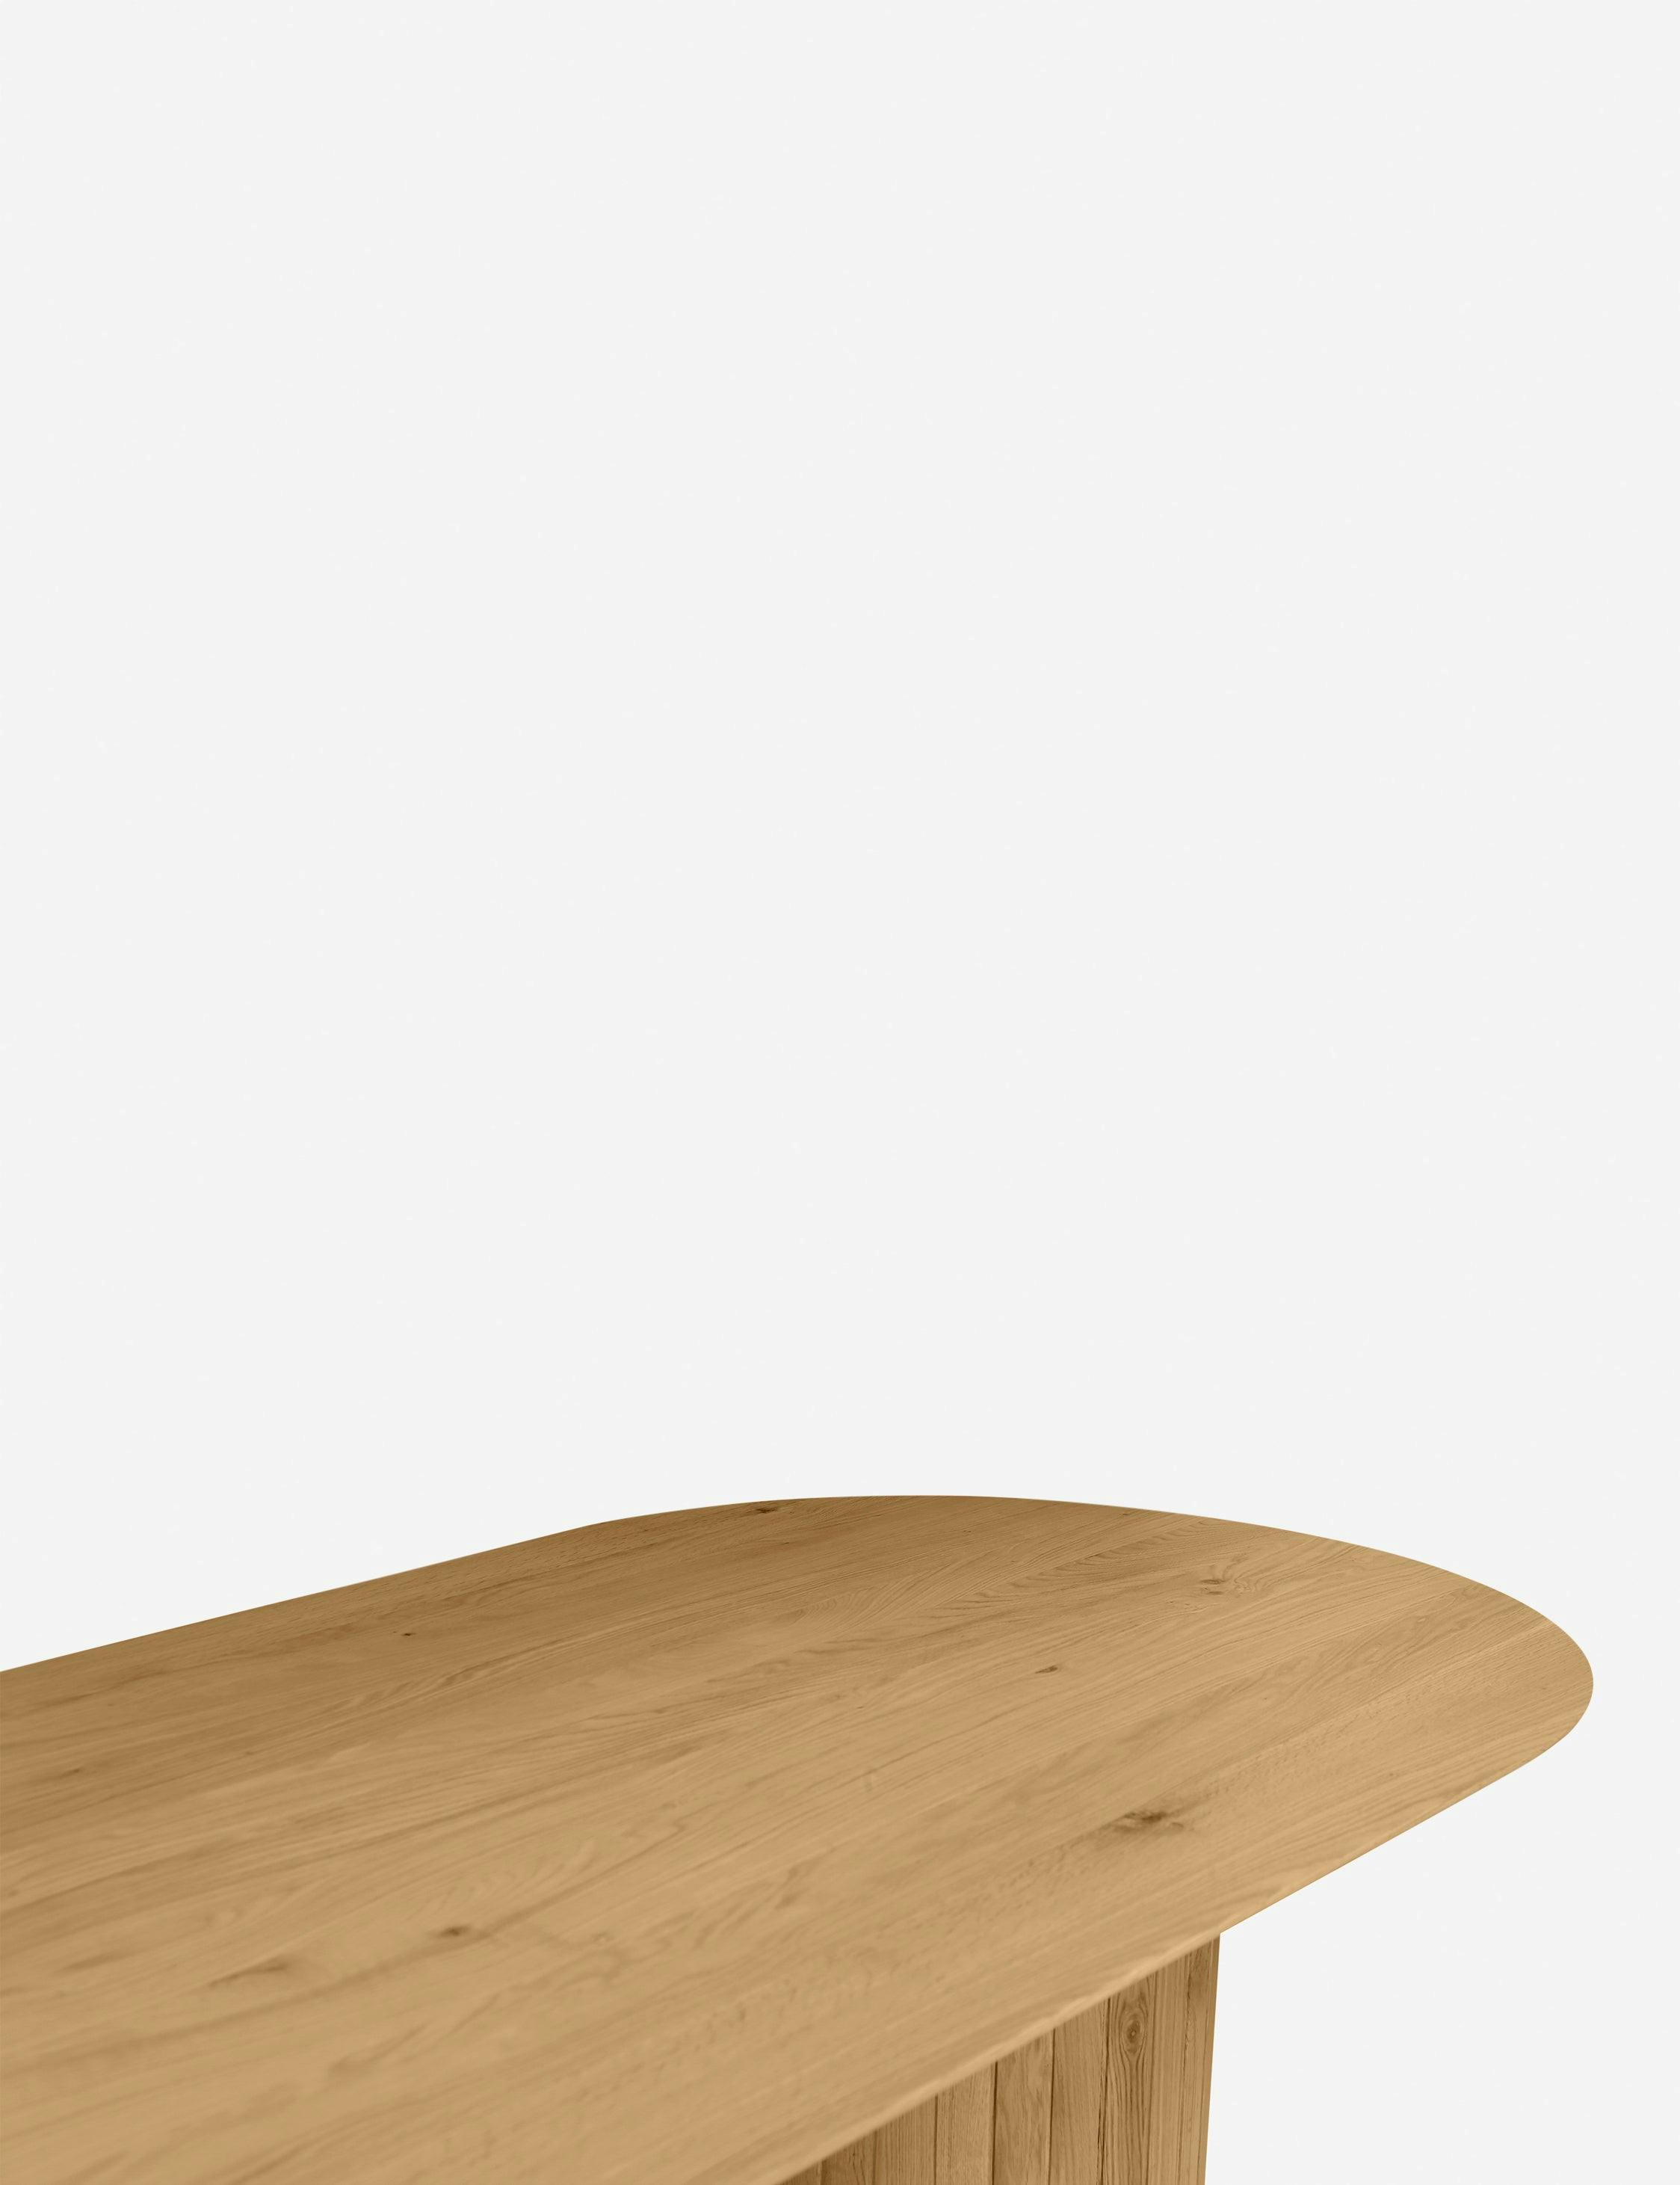 Benedict 86"W Black Oval Acacia Wood Dining Table